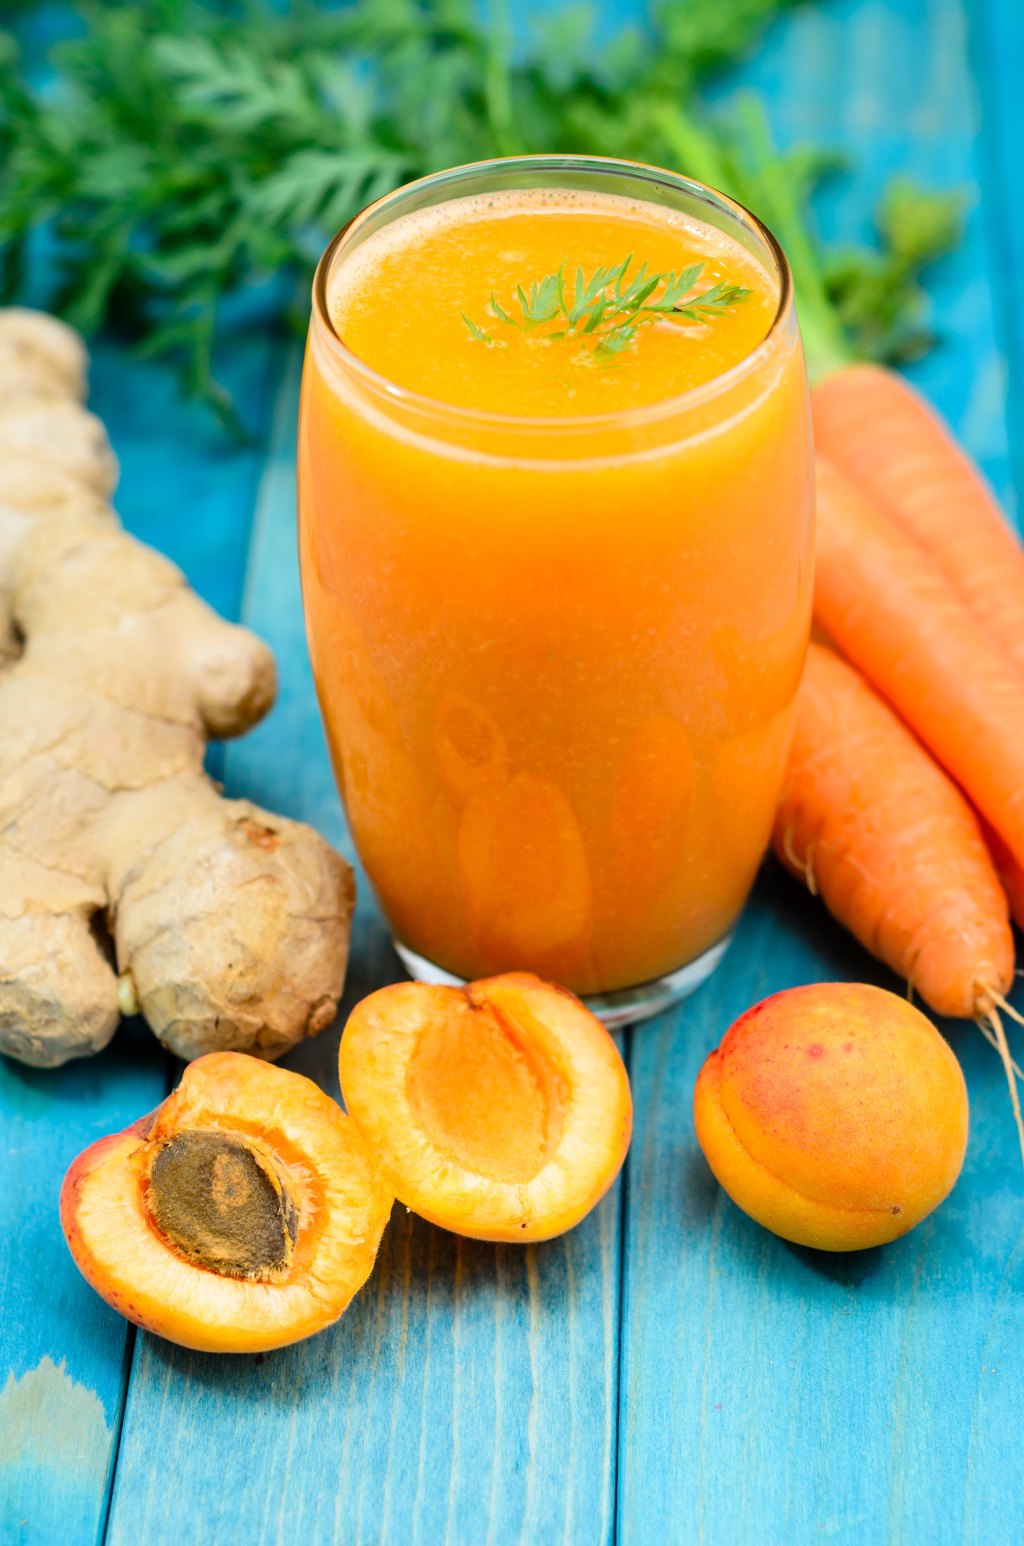 5 Cold-Fighting Juices to Boost Your Immune System